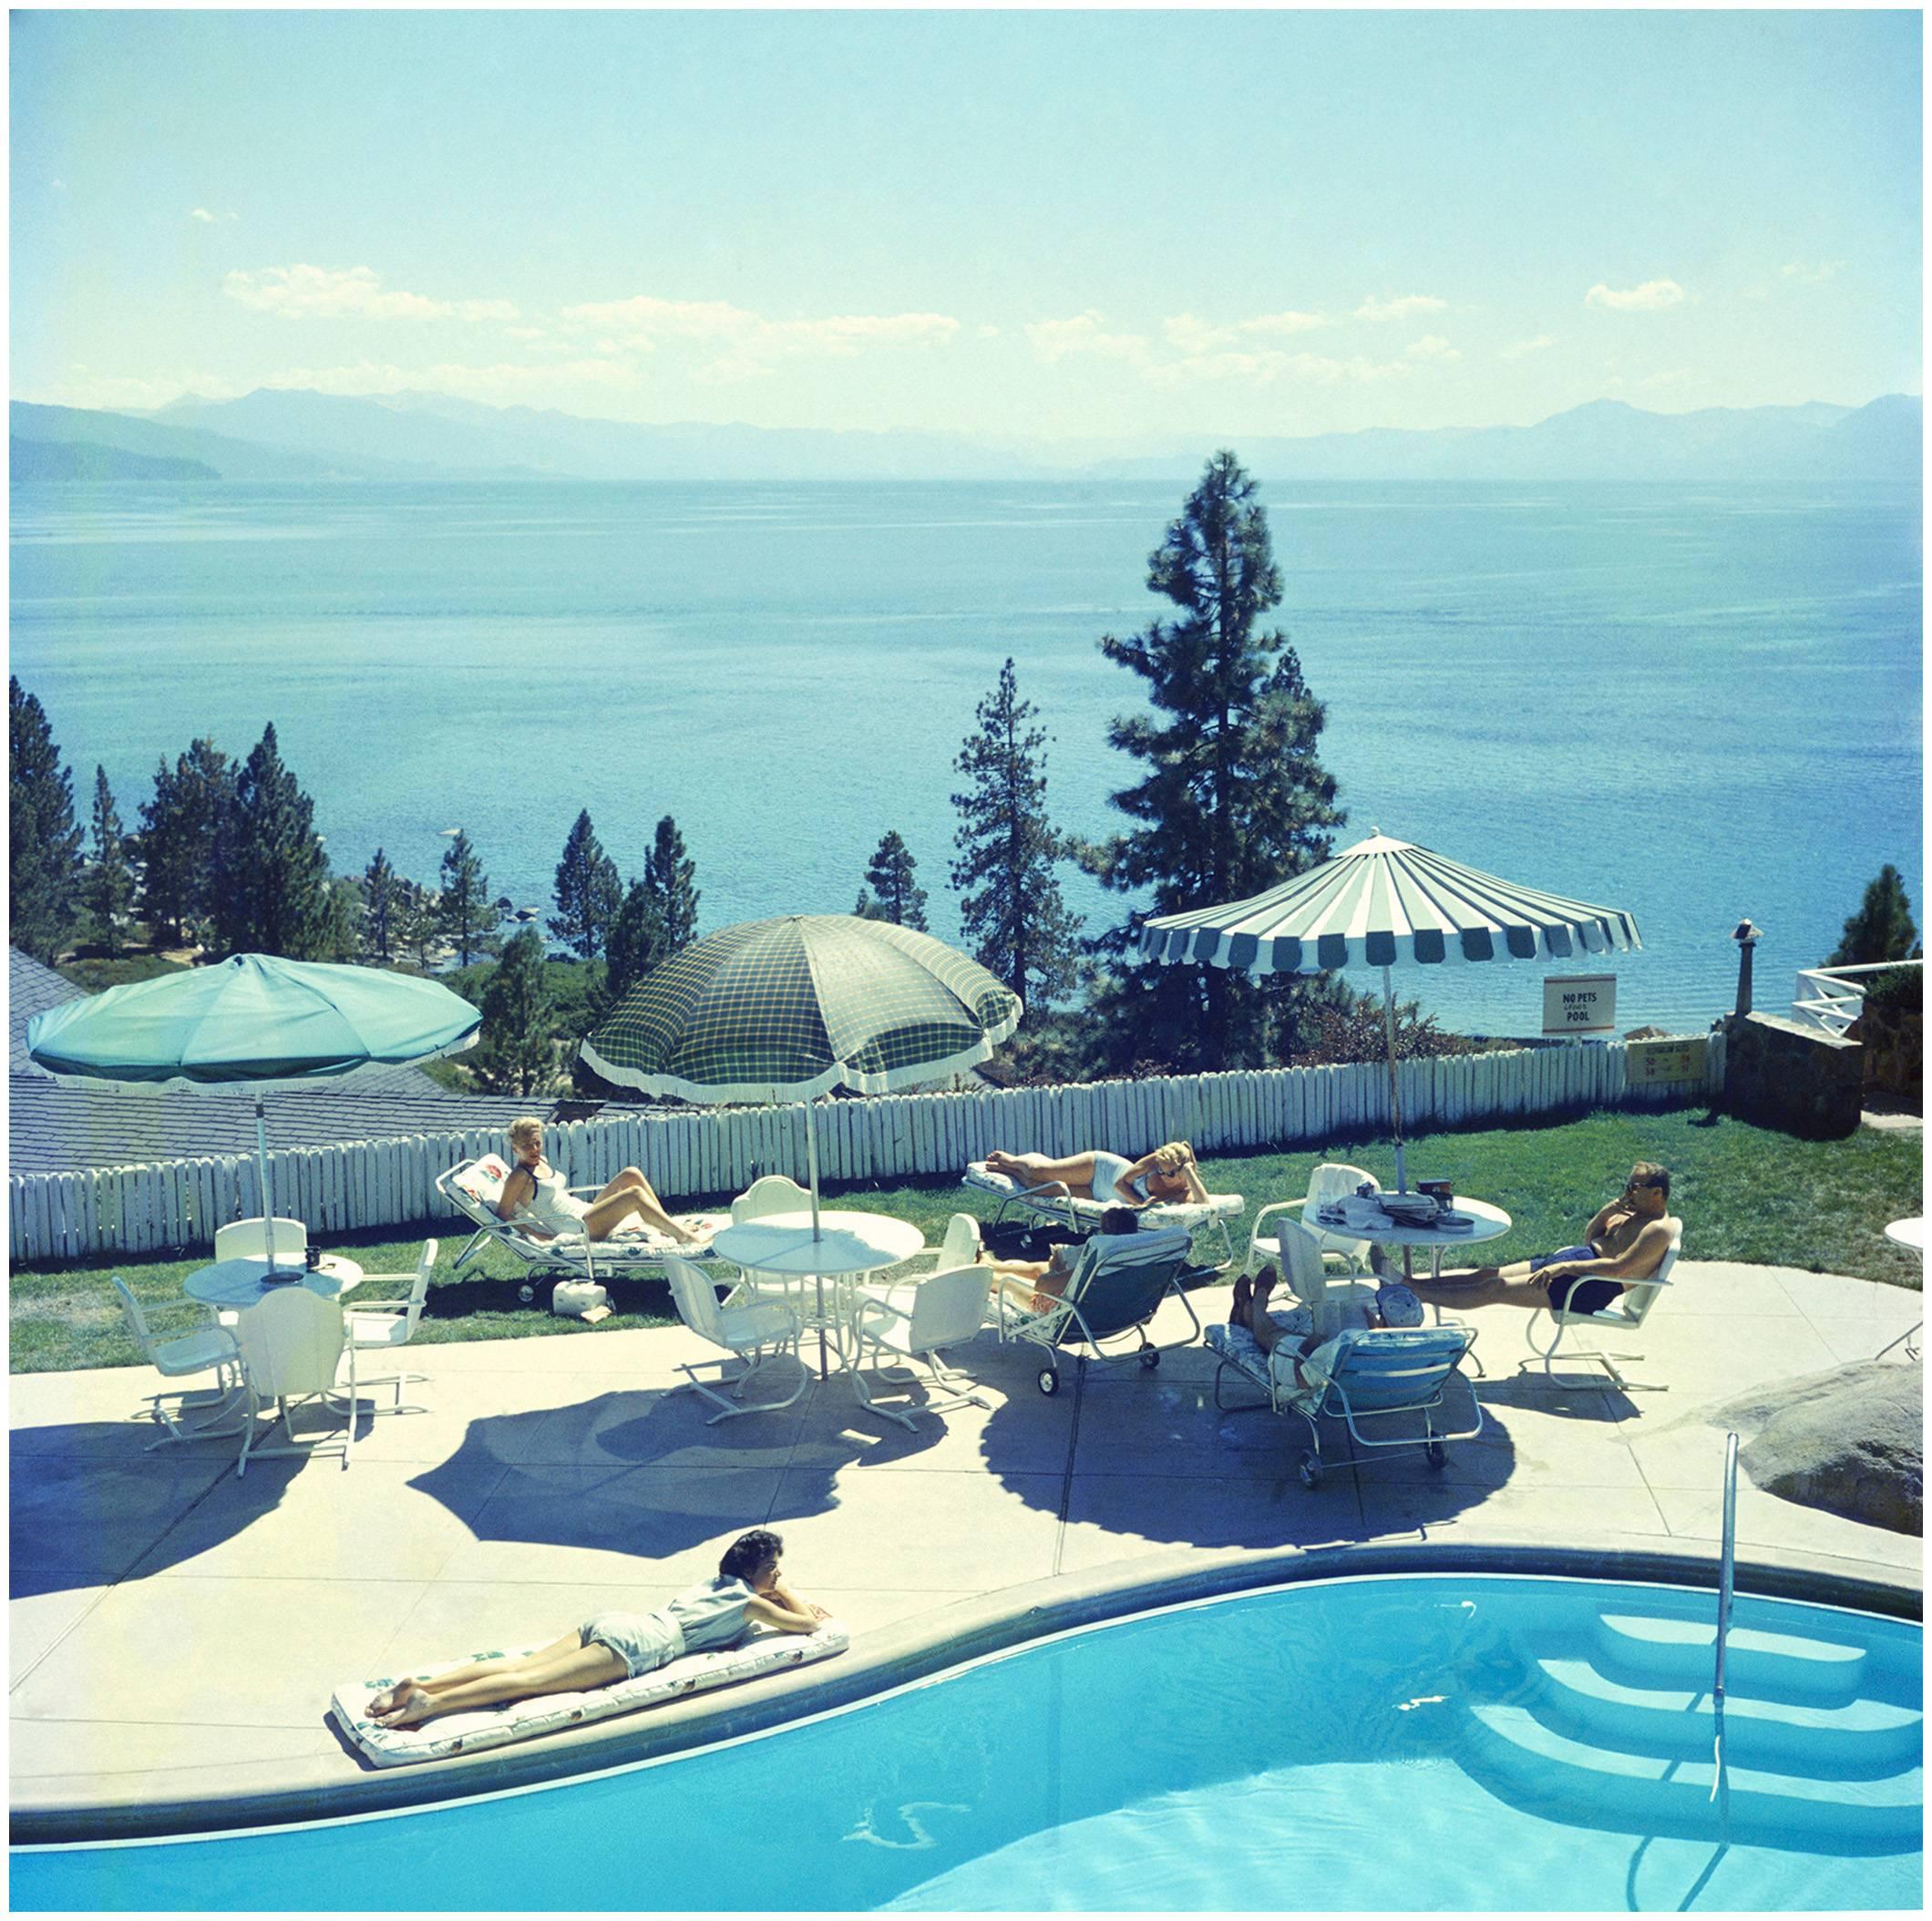 A group of people relaxing by a pool near Lake Tahoe, California, 1959. 

Relaxing at Lake Tahoe
Slim Aarons Estate Edition
48x48 inches
Numbered and stamped by the Slim Aarons Estate. 
Certificate of Authenticity included. 

Purchaser will get the